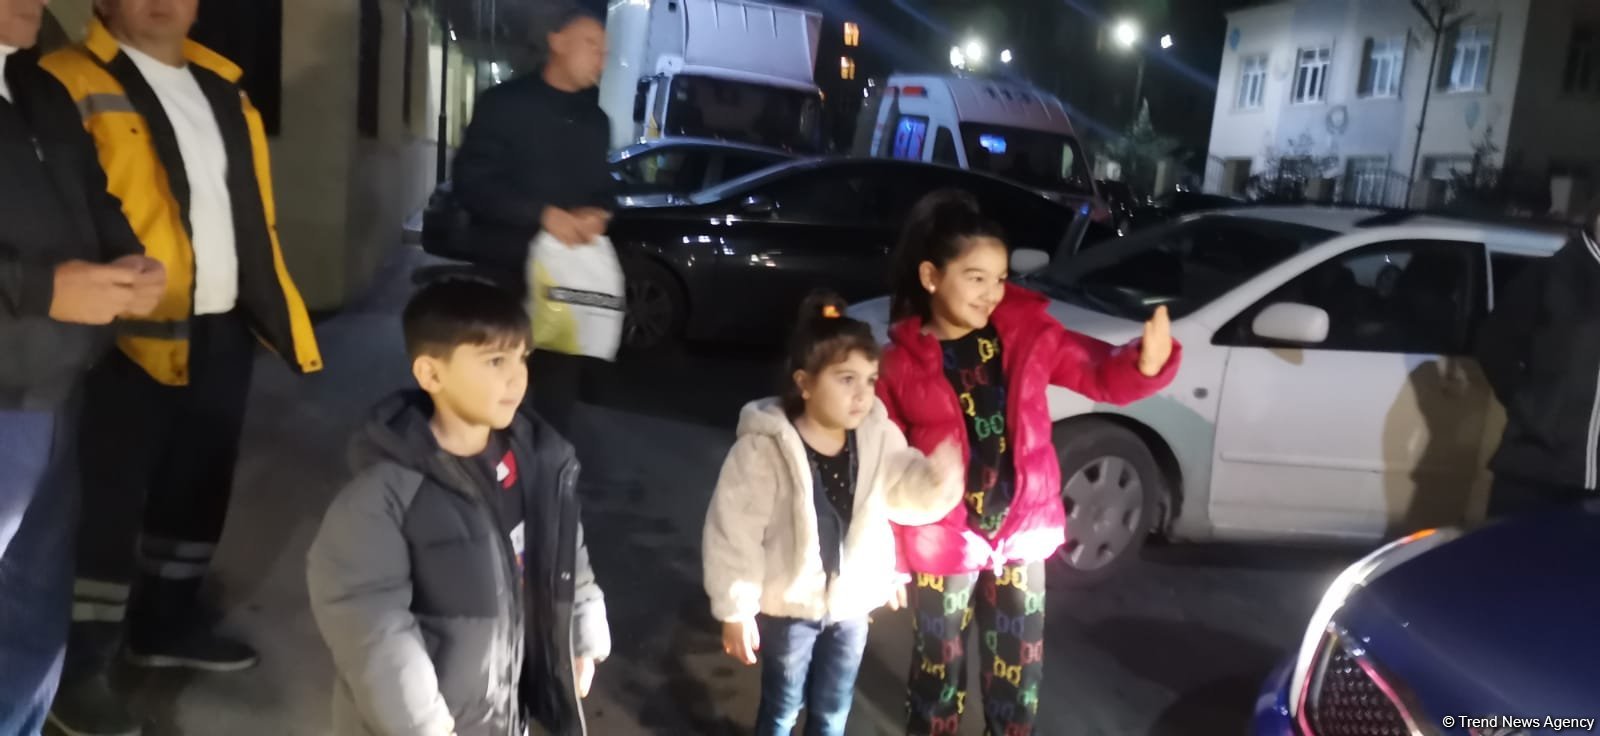 Number of residents back to their native lands in Azerbaijan’s Fuzuli (PHOTO/VIDEO)